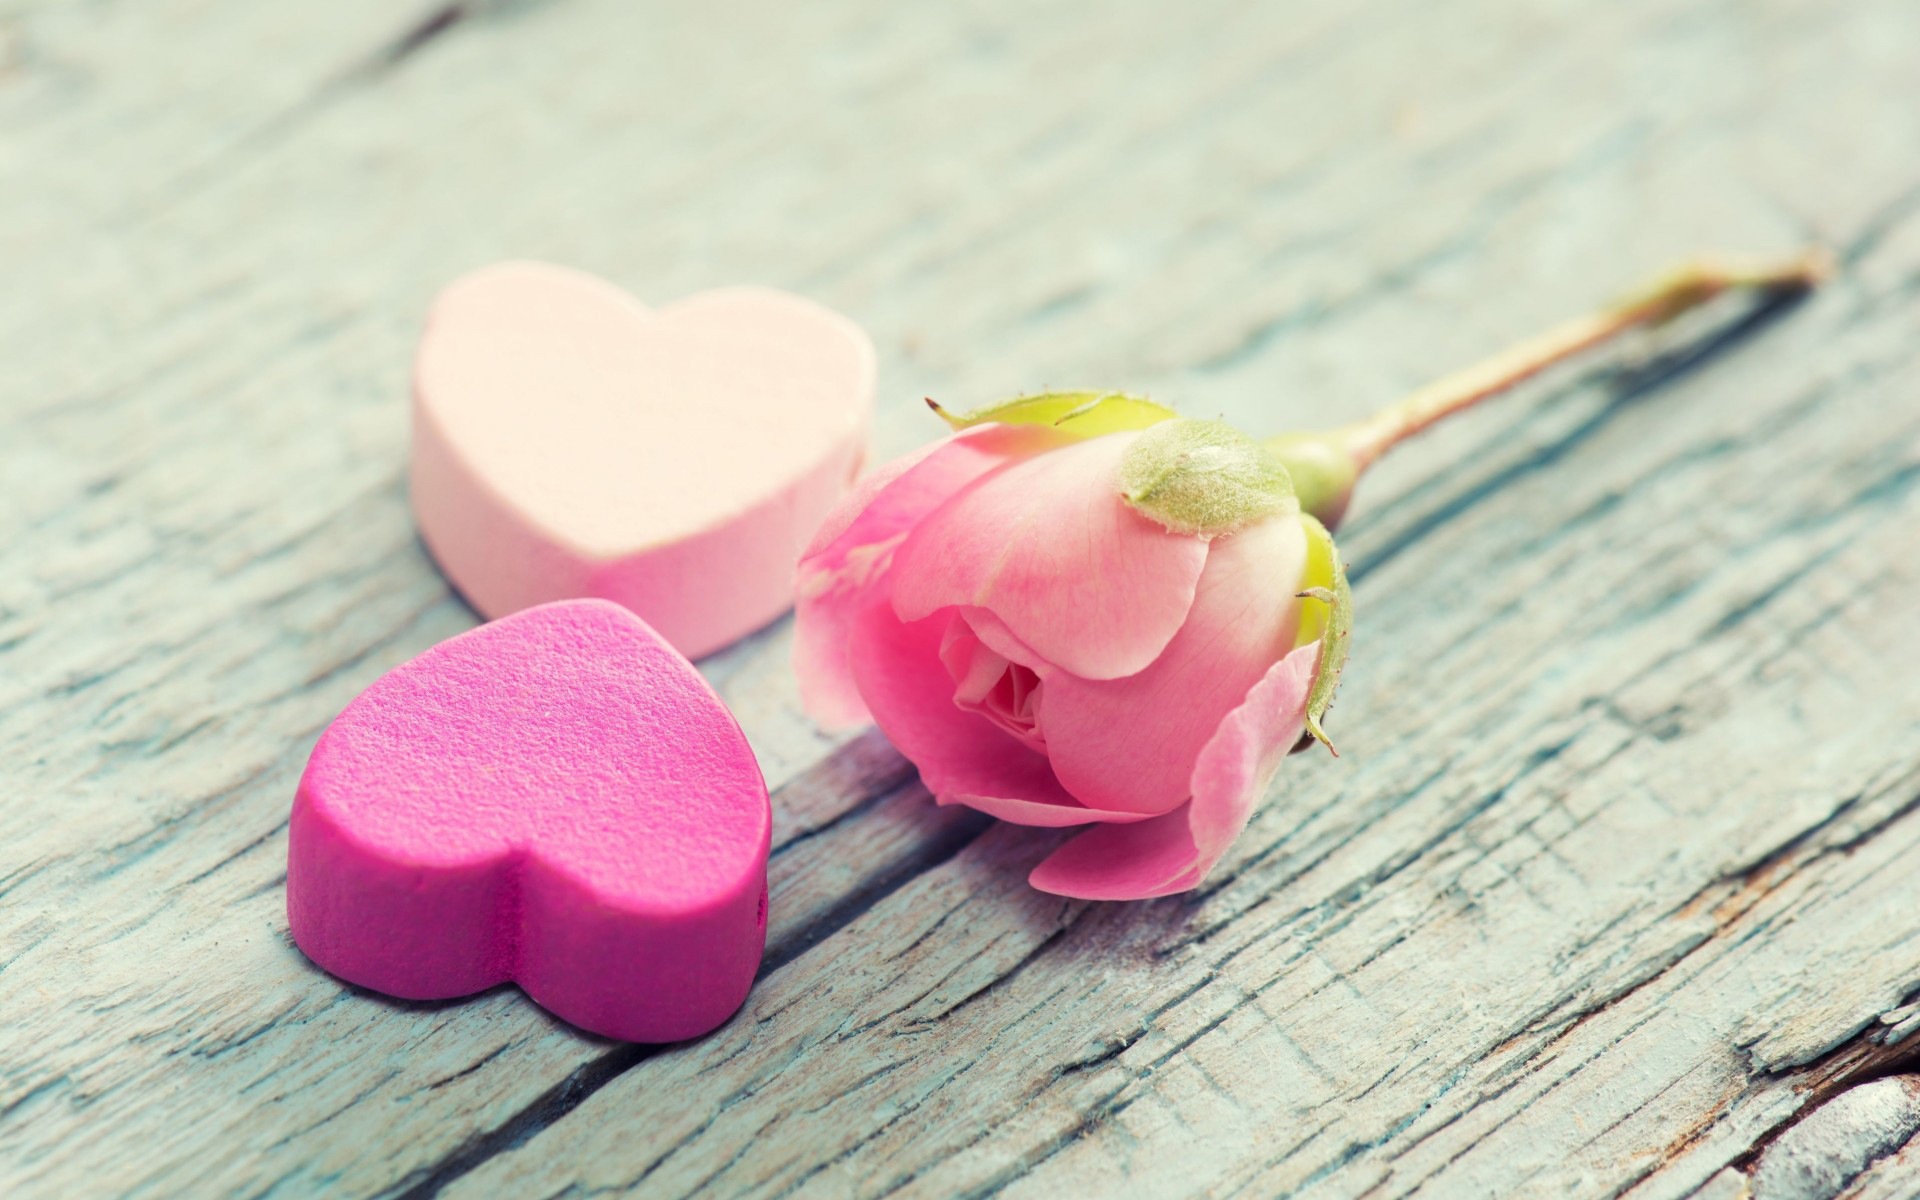 The theme of love, creative heart-shaped HD wallpapers #19 - 1920x1200